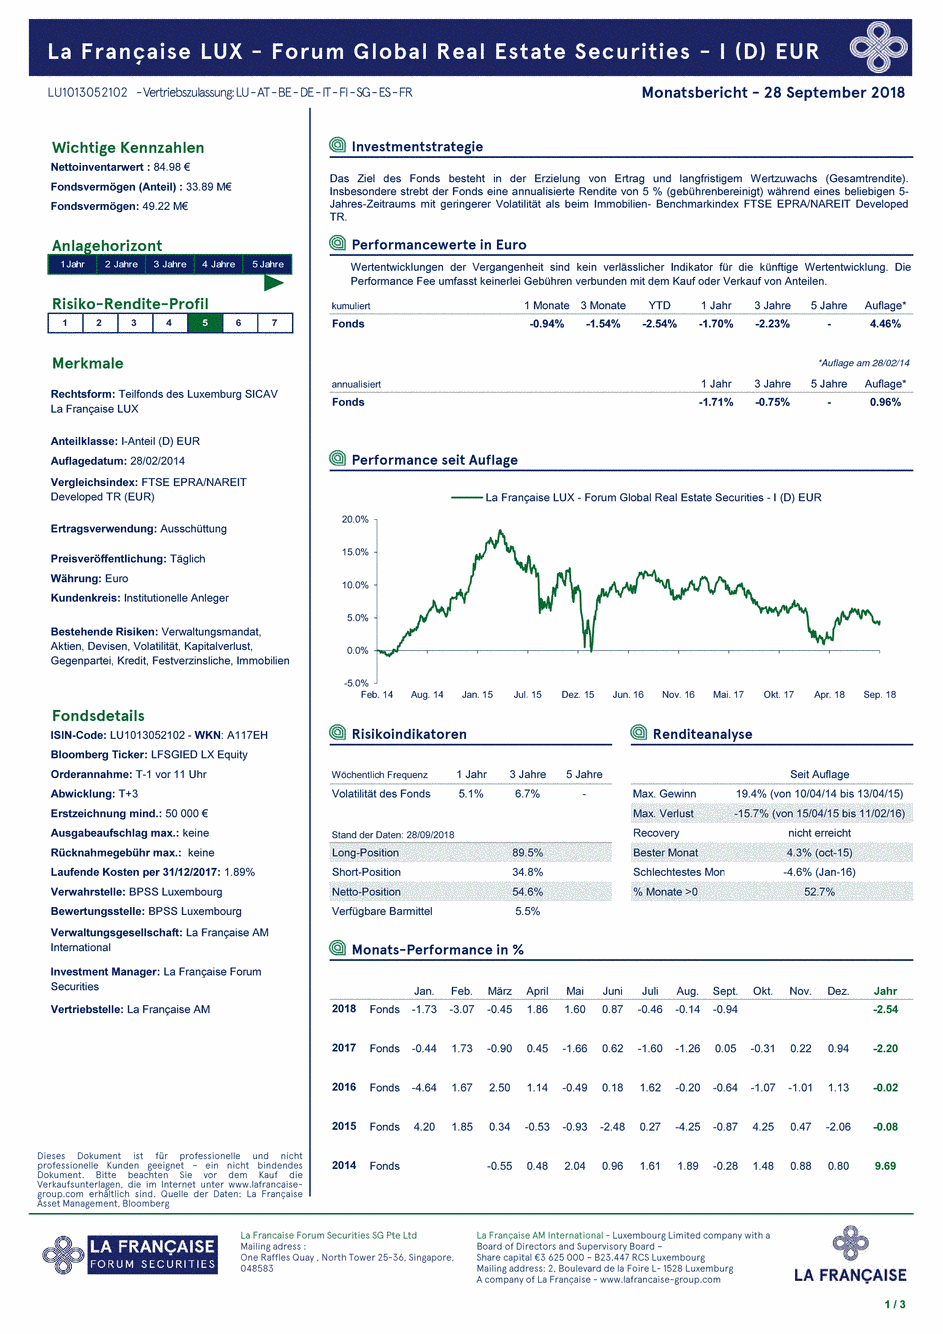 Reporting La Française LUX - Forum Global Real Estate Securities - I (D) EUR - 28/09/2018 - Allemand